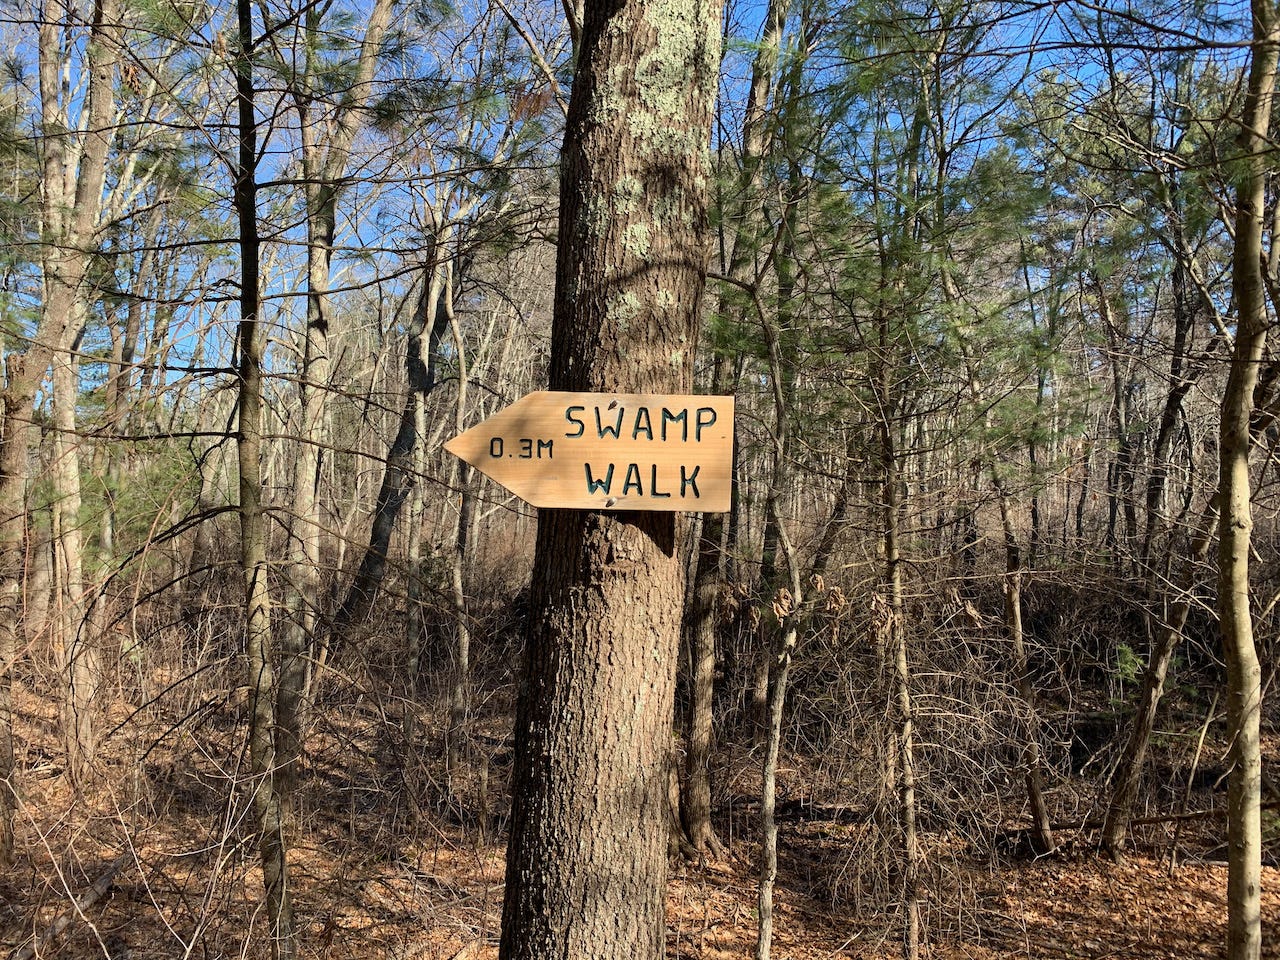 A wooden sign arrow pointing left that says 0.3M Swamp Walk. It's nailed to a tree, and there are other bare trees and scrub pine in the background. There's a blue sky visible through the branches.